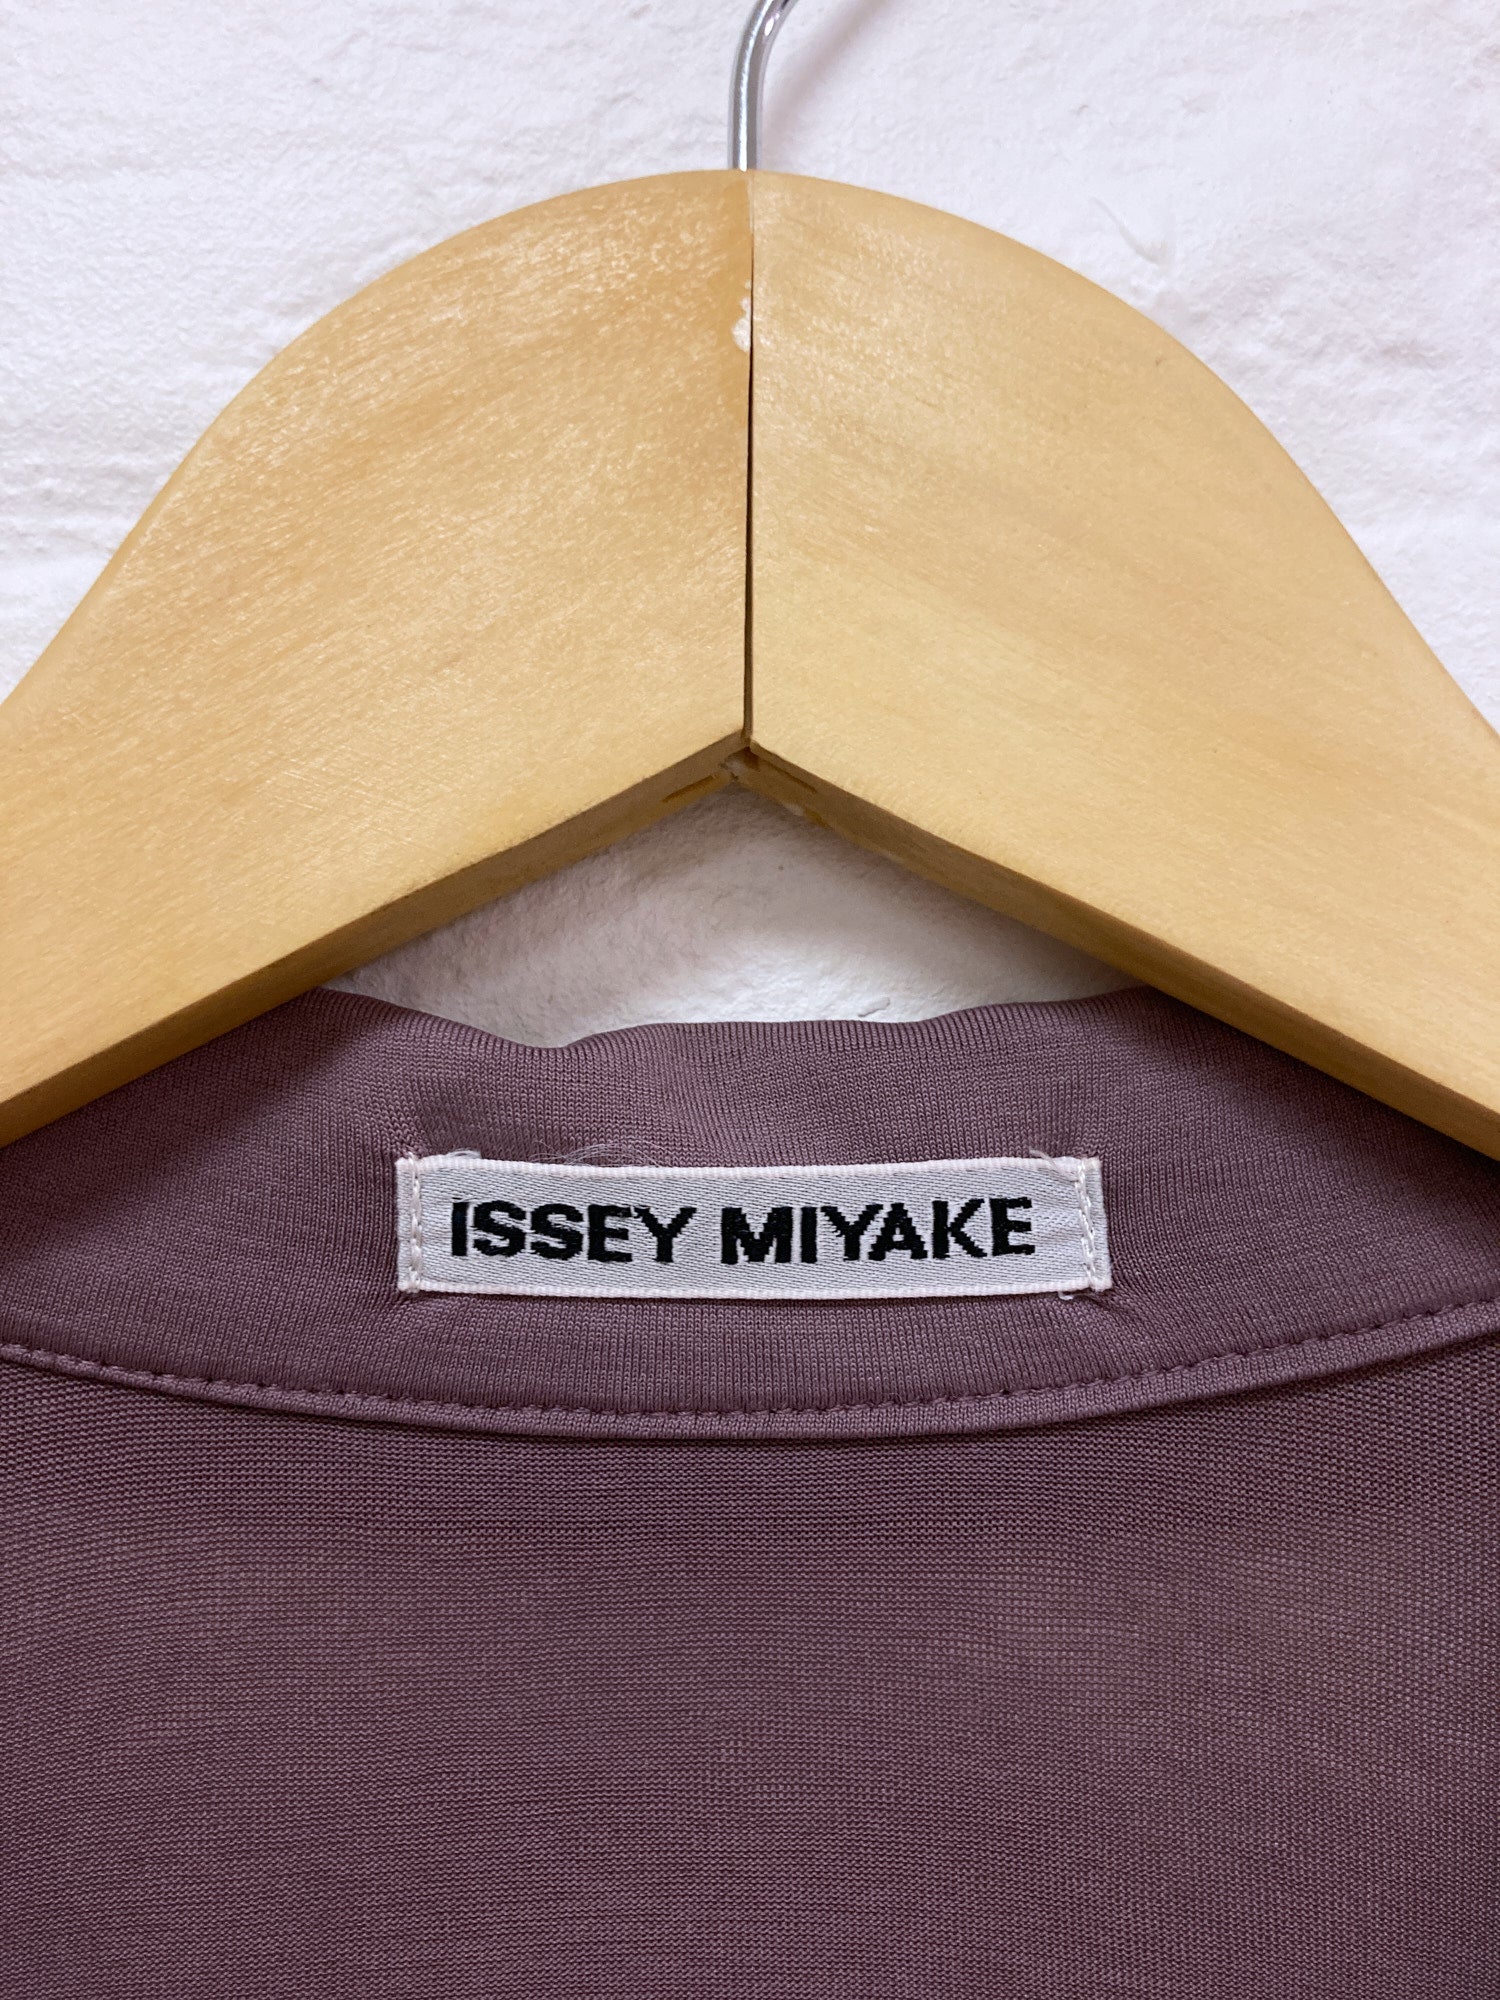 Issey Miyake lavender-y jersey knit long sleeve shirt - 2 M S